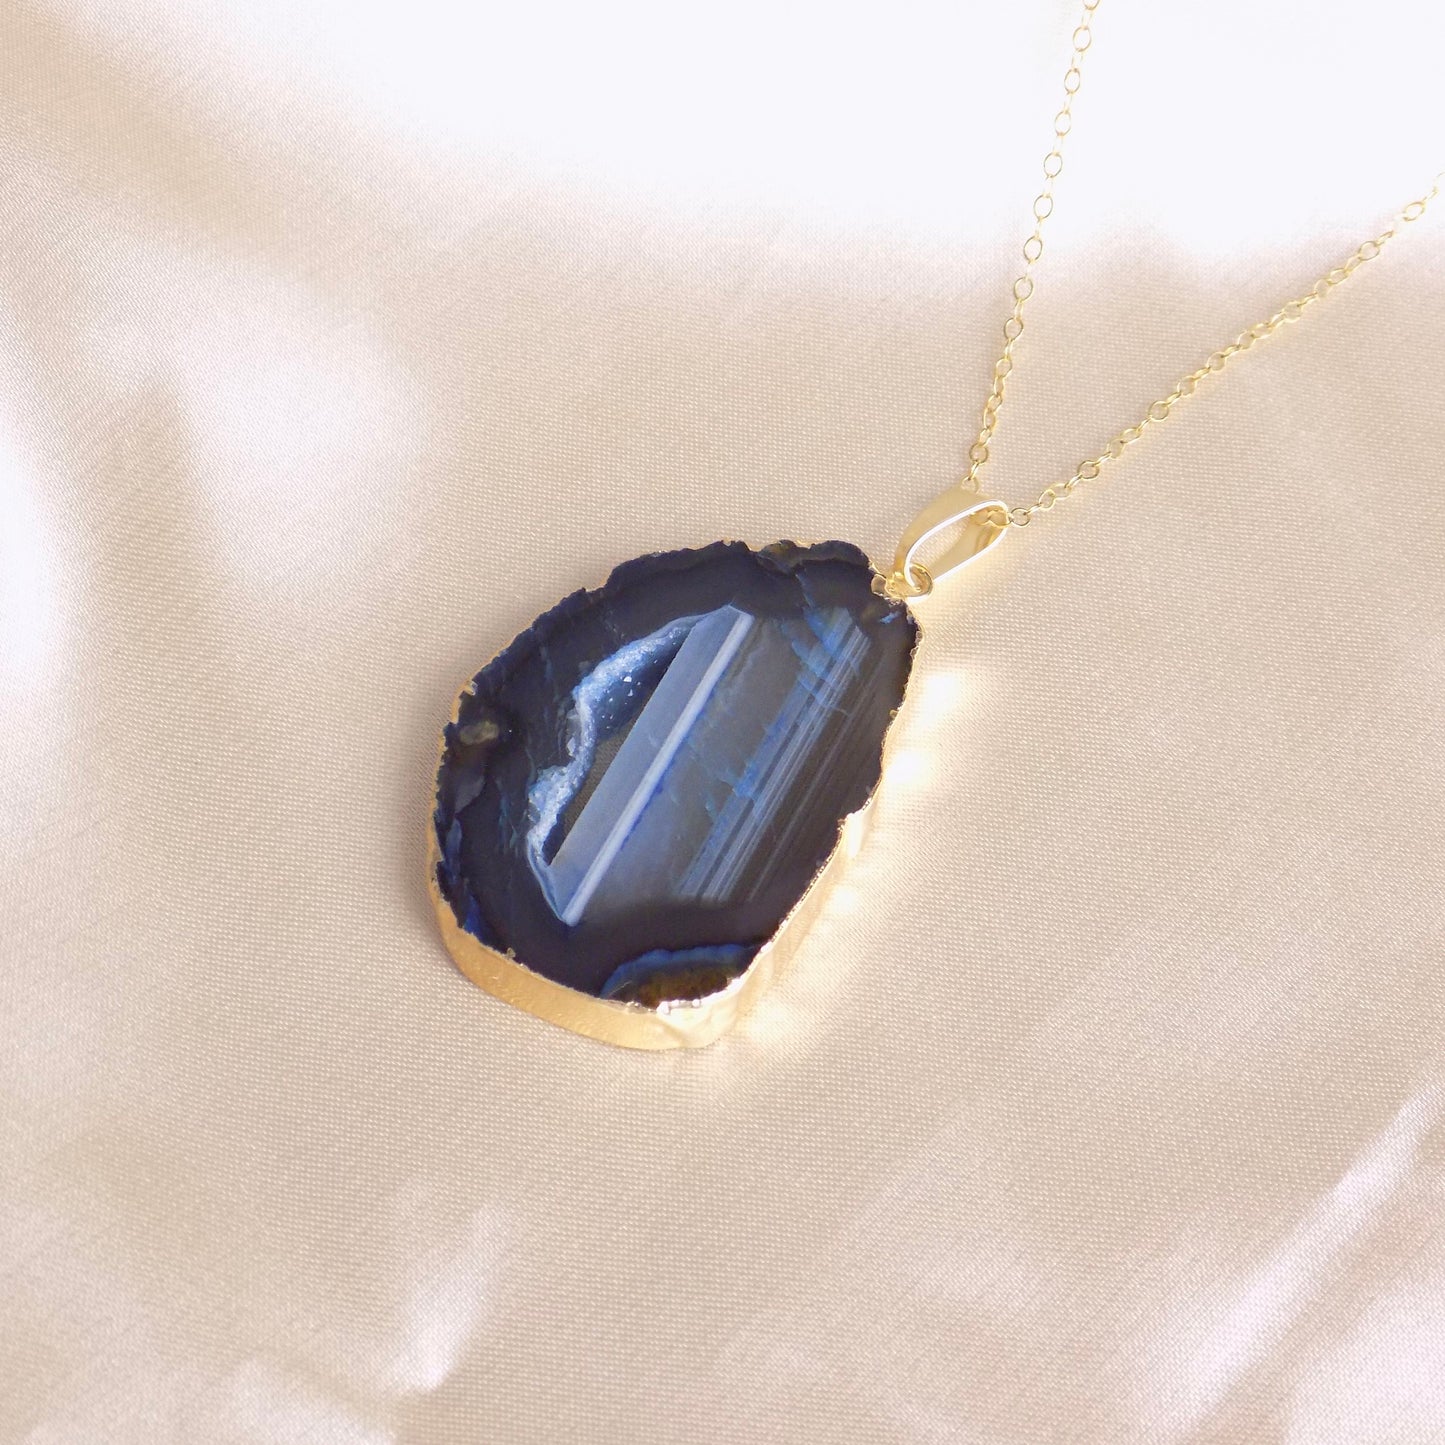 Black Geode Necklace Gold, Unique Druzy Crystal Pendant, Personalized Christmas Gift For Her, G14-753